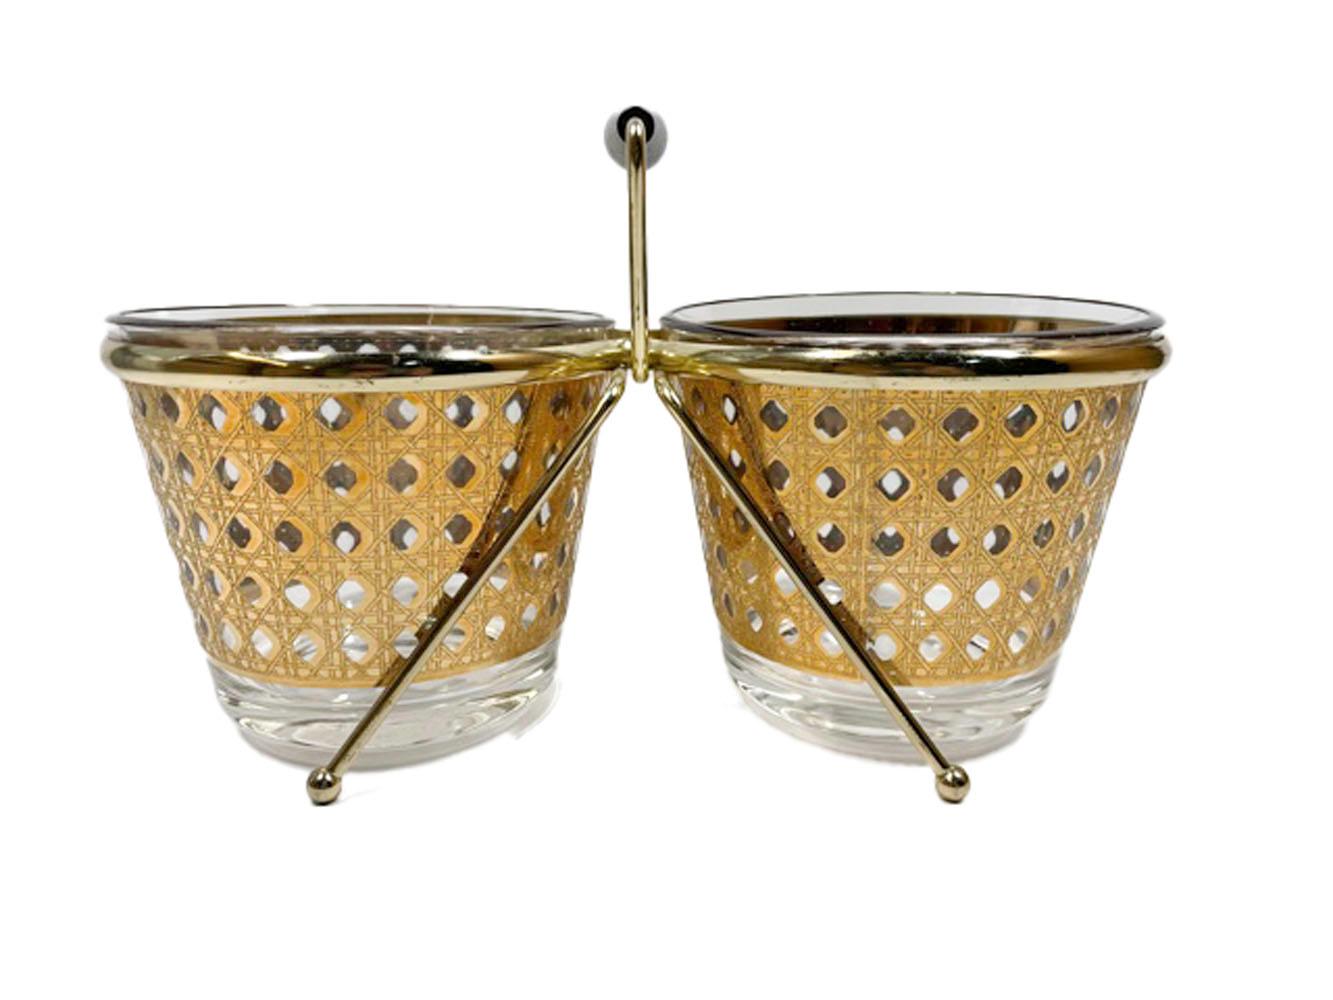 American Unusual Vintage Culver Double Ice Bowls in the Canella Pattern with Metal Caddy